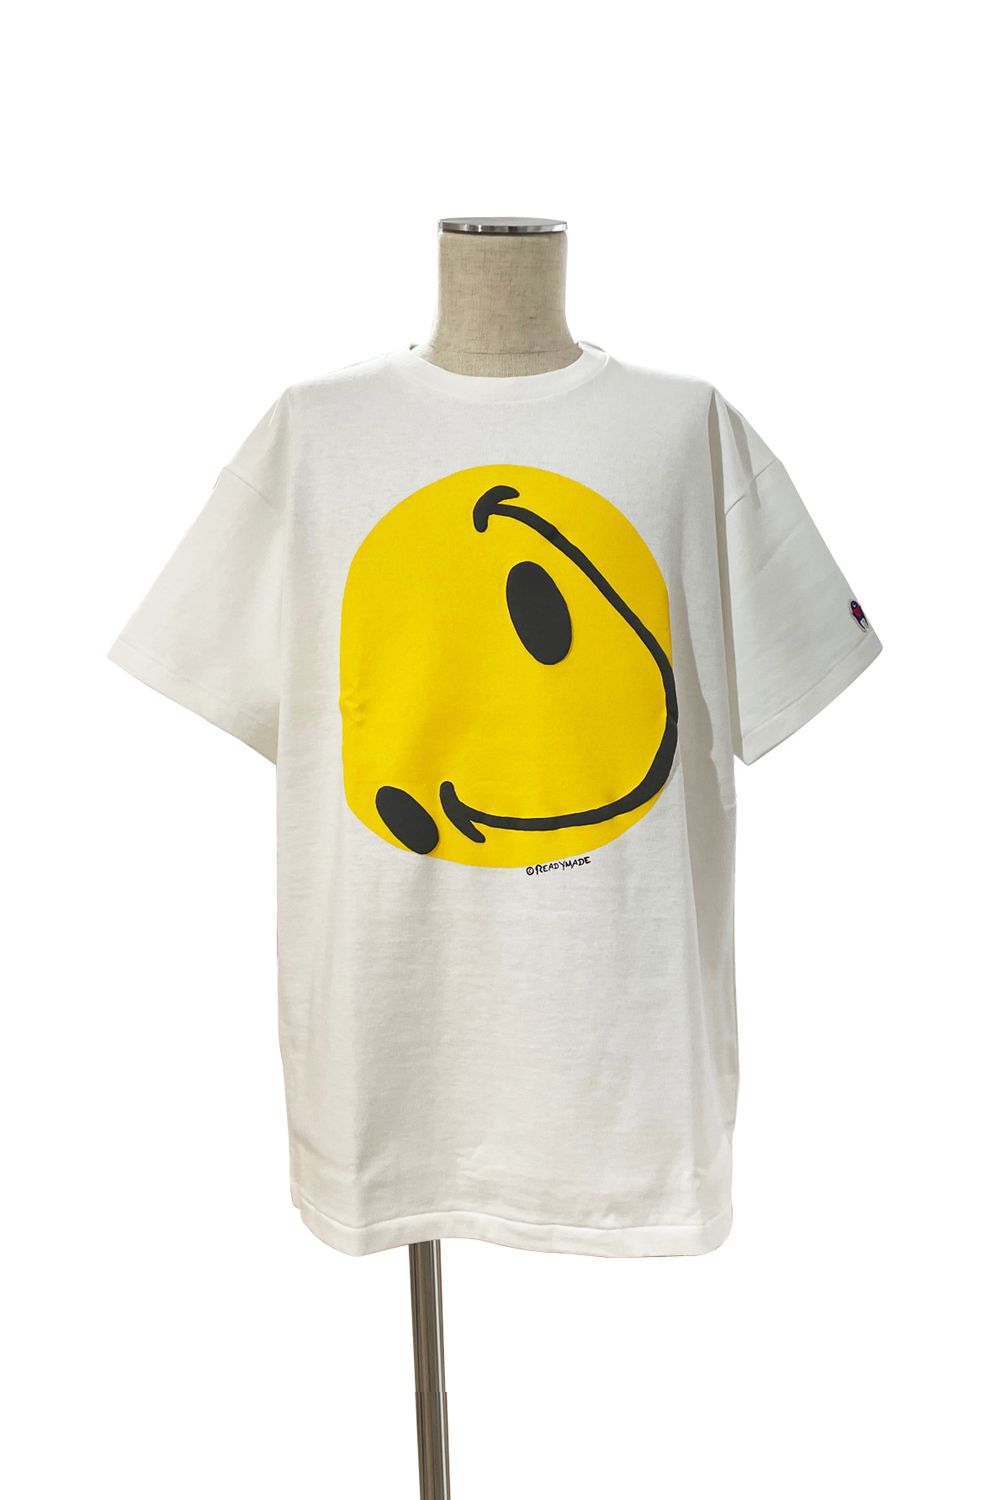 SS21 READYMADE COLLAPSED FACE T-SHIRT530cm身幅